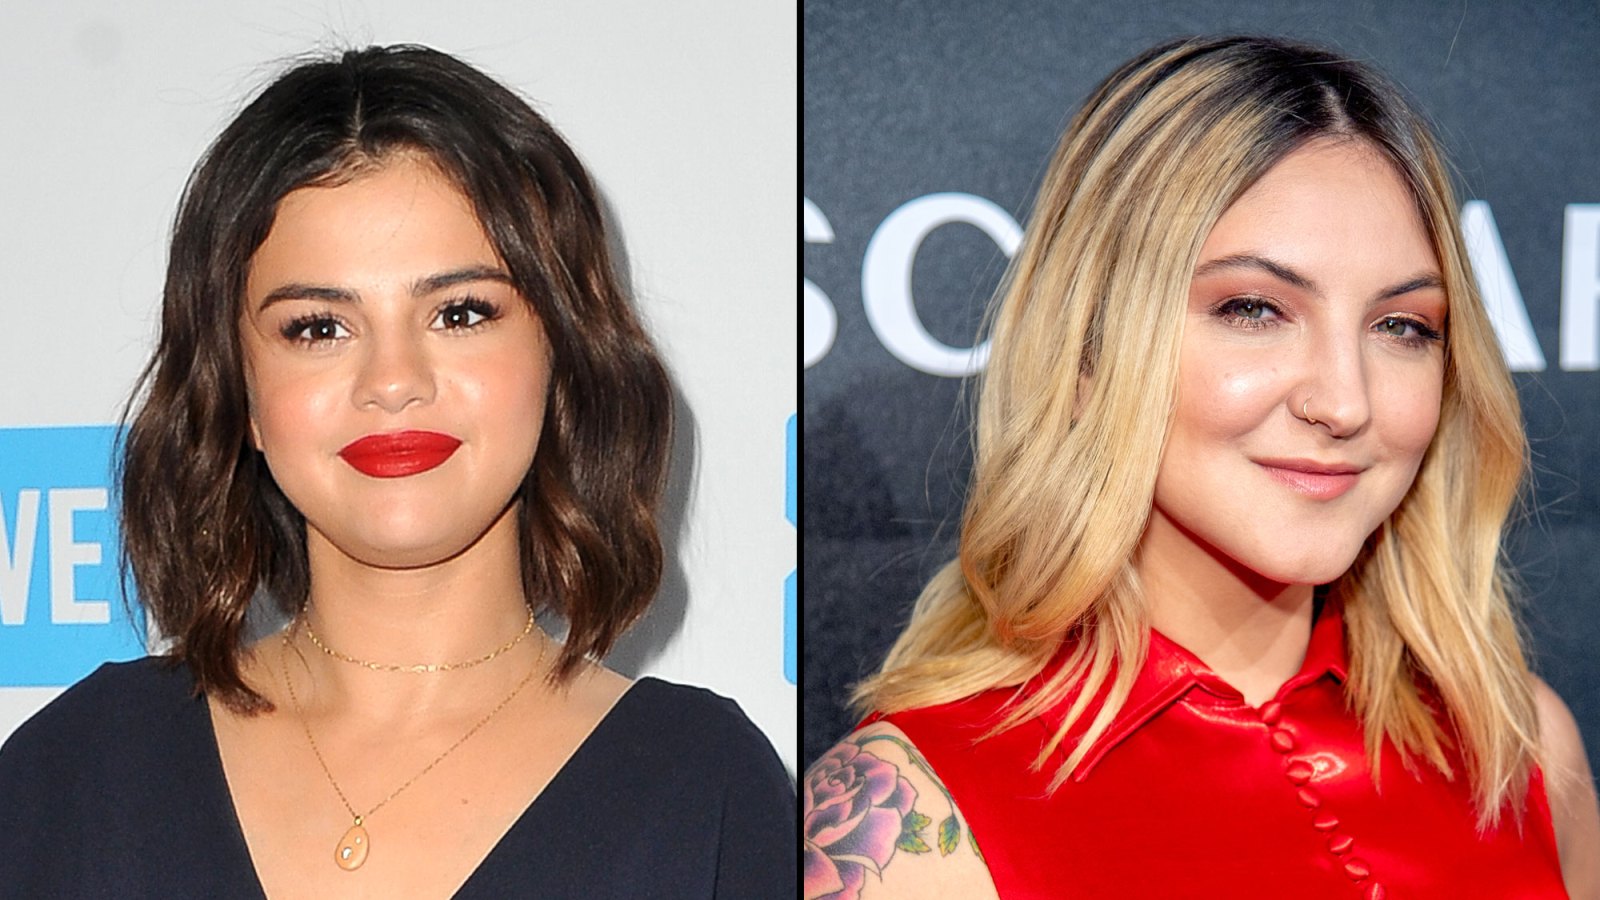 Selena Gomez Sings About Her Anxiety Battle on New Track With Julia Michaels